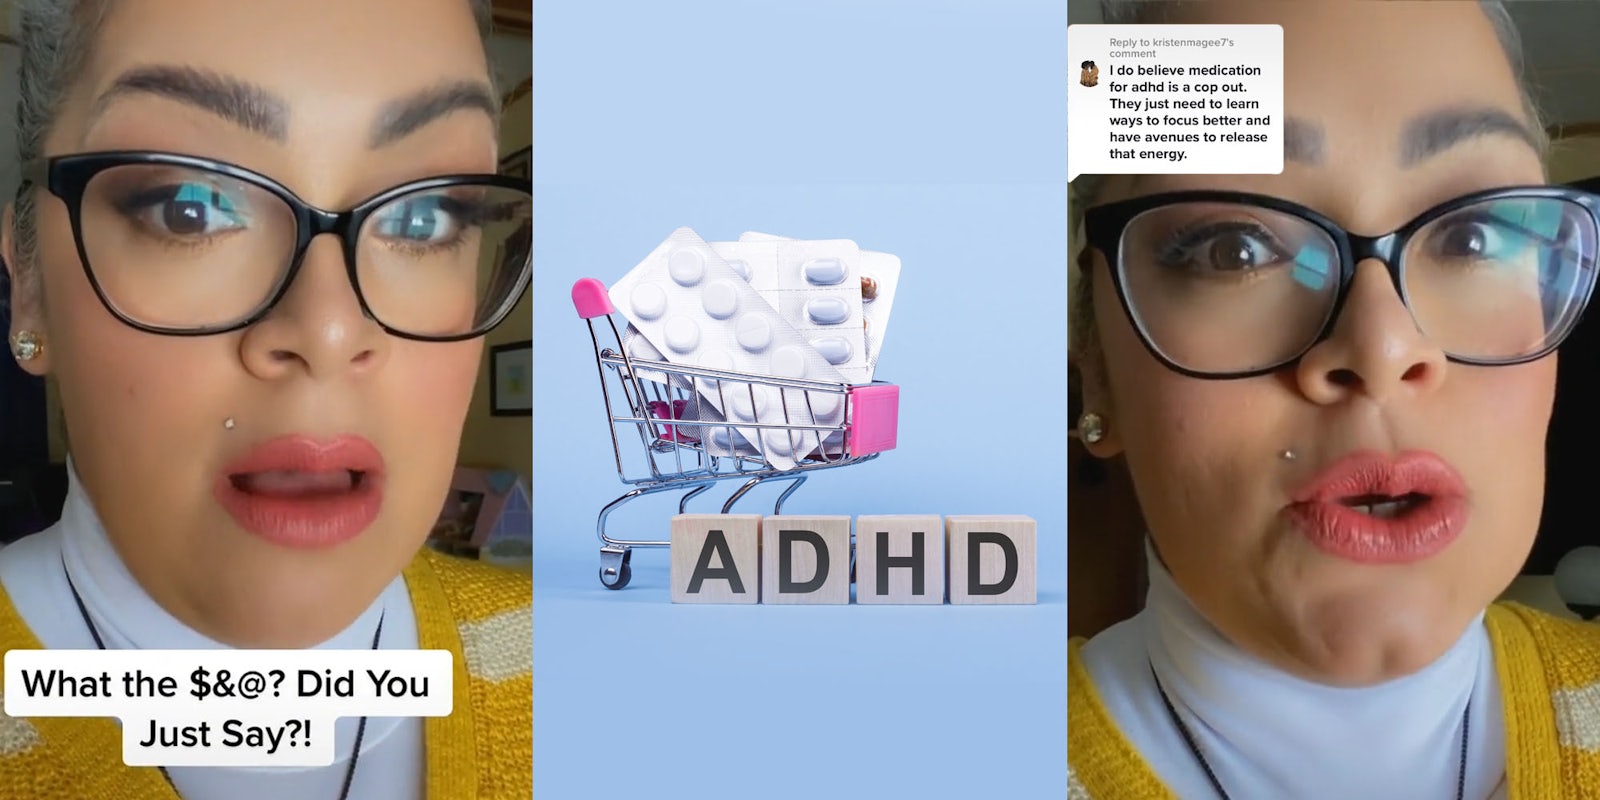 woman upset speaking caption 'What the $&@? Did You Just Say?!' (l) tiny shopping cart with pills inside wooden blocks 'ADHD' adjacent on light blue background (c) woman speaking upset caption 'I do believe medication for adhd is a cop out. They just need to learn ways to focus better and have avenues to release that energy.' (r)